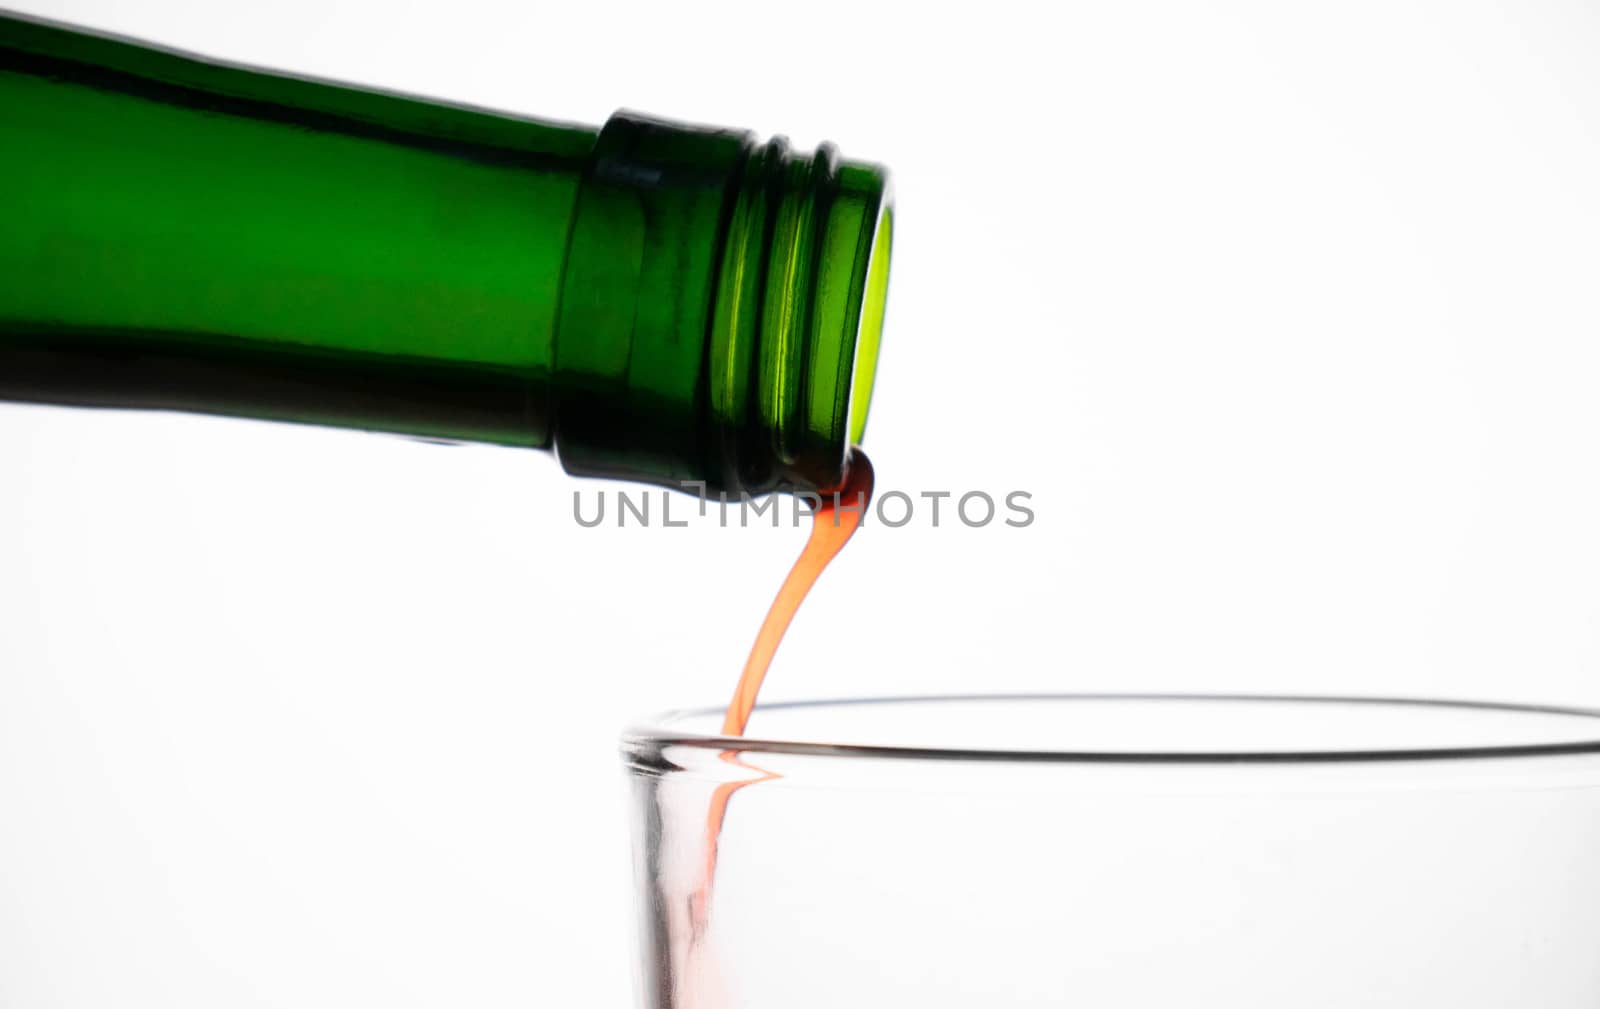 Close up of pouring fruit juice from green bottle into glass, isClose up of pouring fruit juice from green bottle into glass, isolated on white background. by TEERASAK